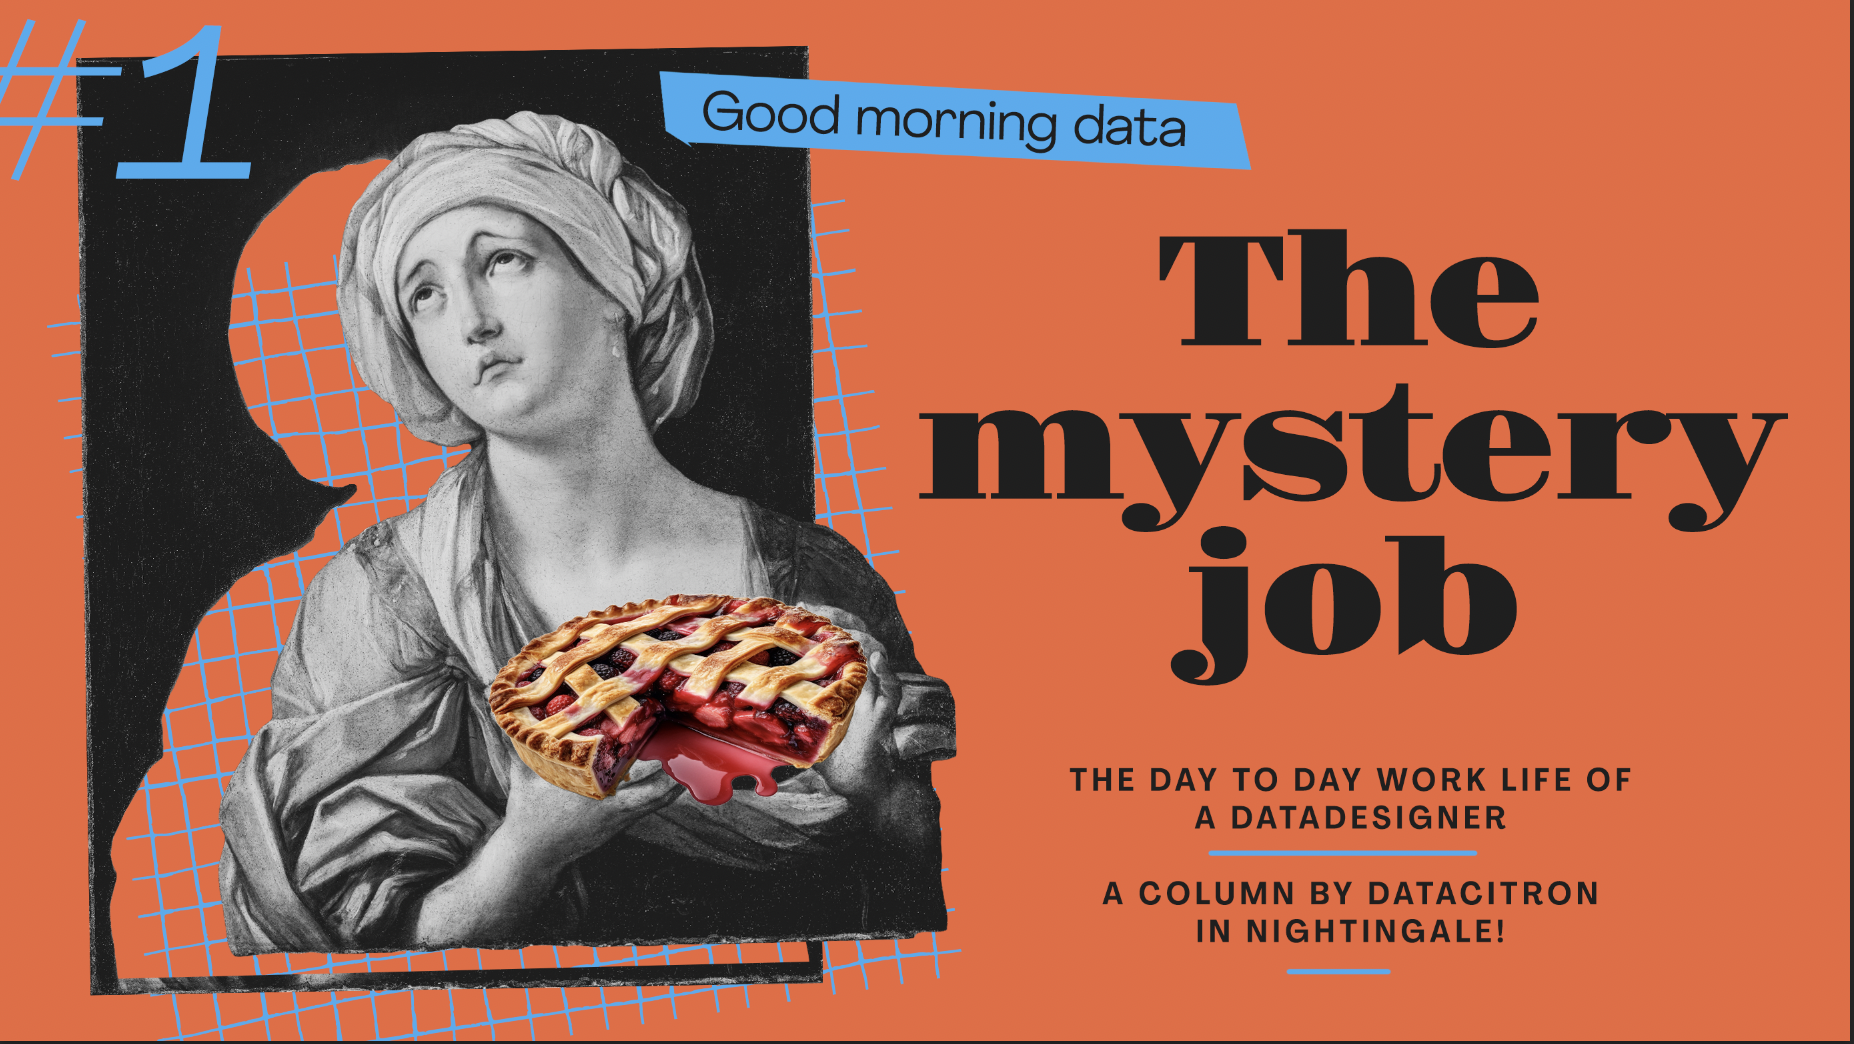 This image features a striking design for a column titled "The mystery job," which discusses the daily work life of a "datadesigner." The background is a vivid orange, and the layout includes a mix of modern and classical elements. On the left, a classical artwork of a woman looking upwards is superimposed with a pie, replacing part of her head, creating a surreal and whimsical effect. The text "Good morning data" is placed at the top left corner in a playful, bold blue font. The main title, "The mystery job," is centrally located in large, bold, black letters. Additional information states the column is by "Datacitron" in "Nightingale," indicated at the bottom. The design uses sharp contrasts in colors and a mix of graphics to create an eye-catching and creative visual.